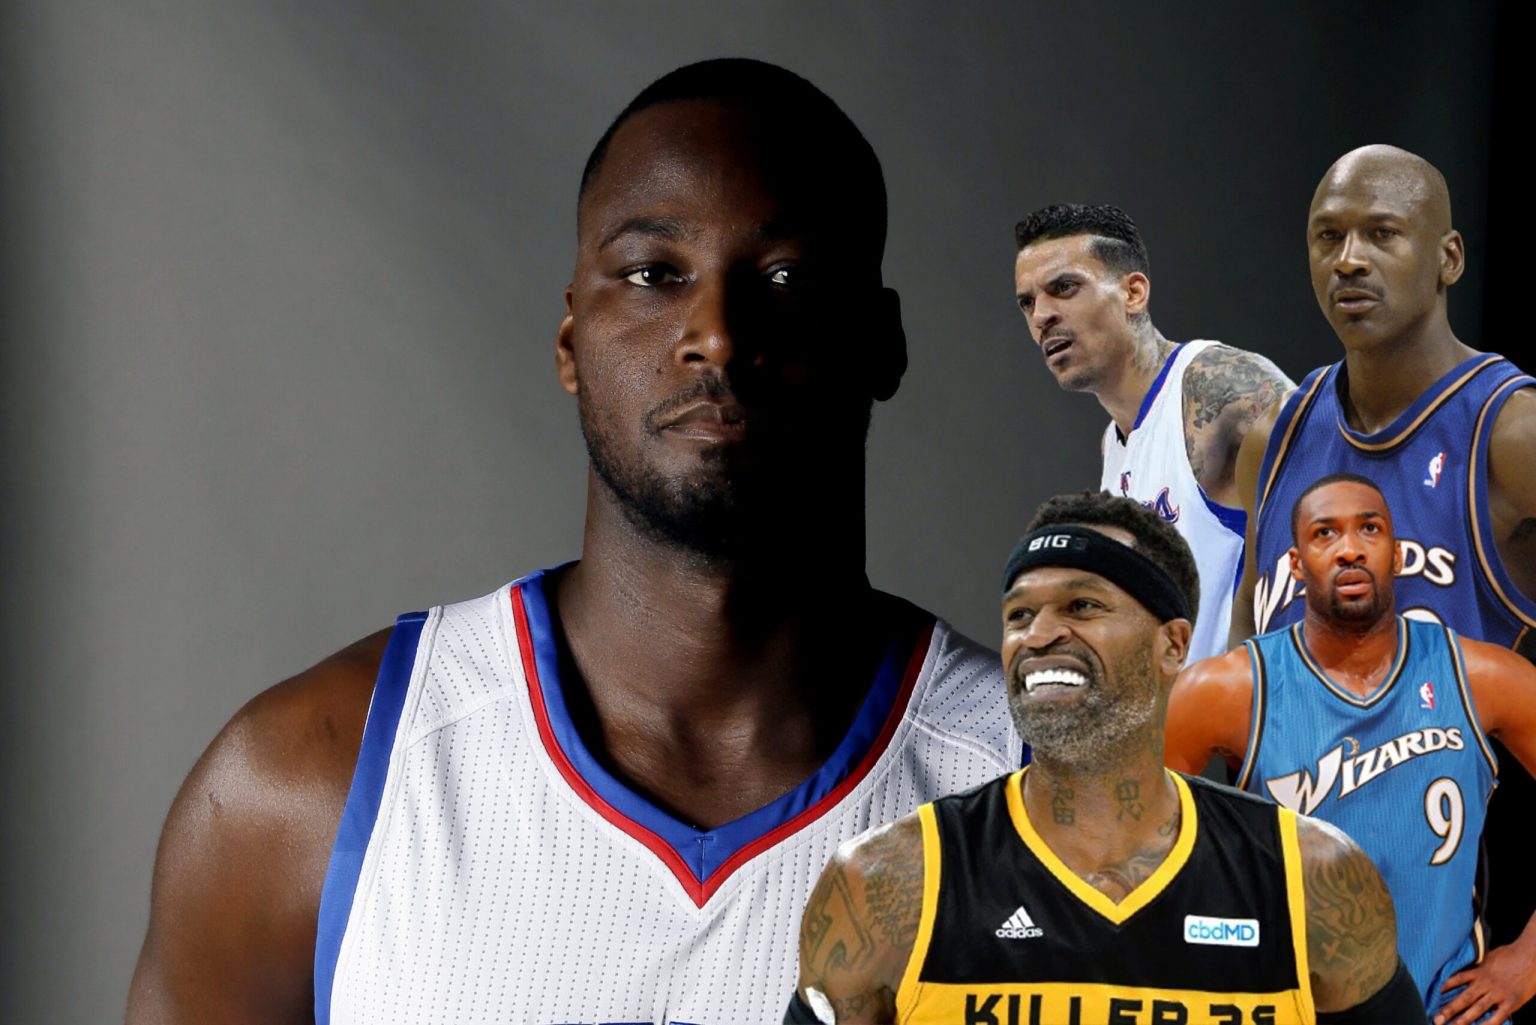 Video of Kwame Brown clapping back at Gilbert Arenas, Matt Barnes and